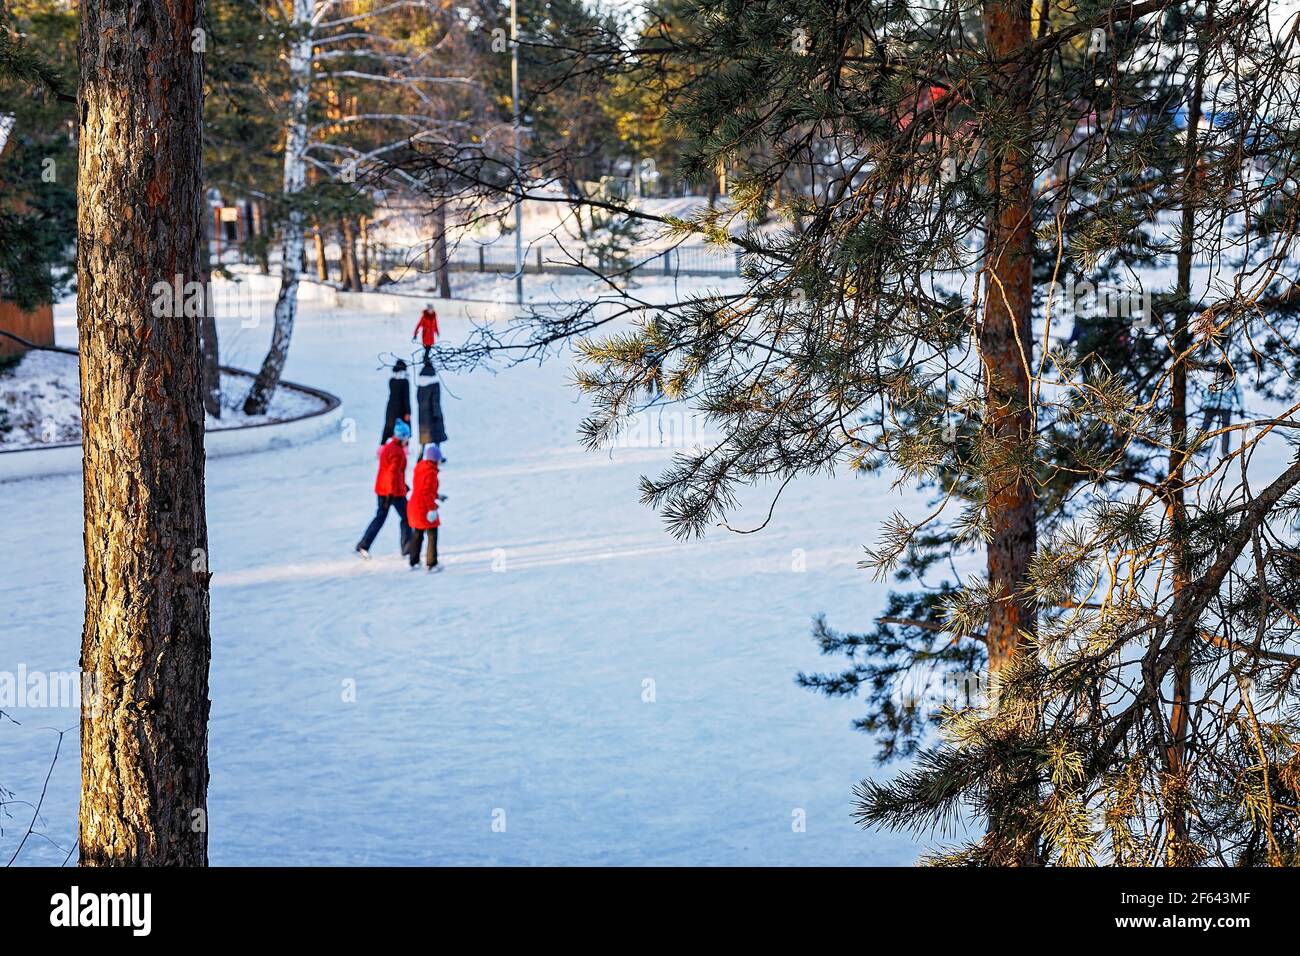 People in bright winter clothes are ice skating on a lake. Sunny day, pine forest, active lifestyle, cold weather. Stock Photo